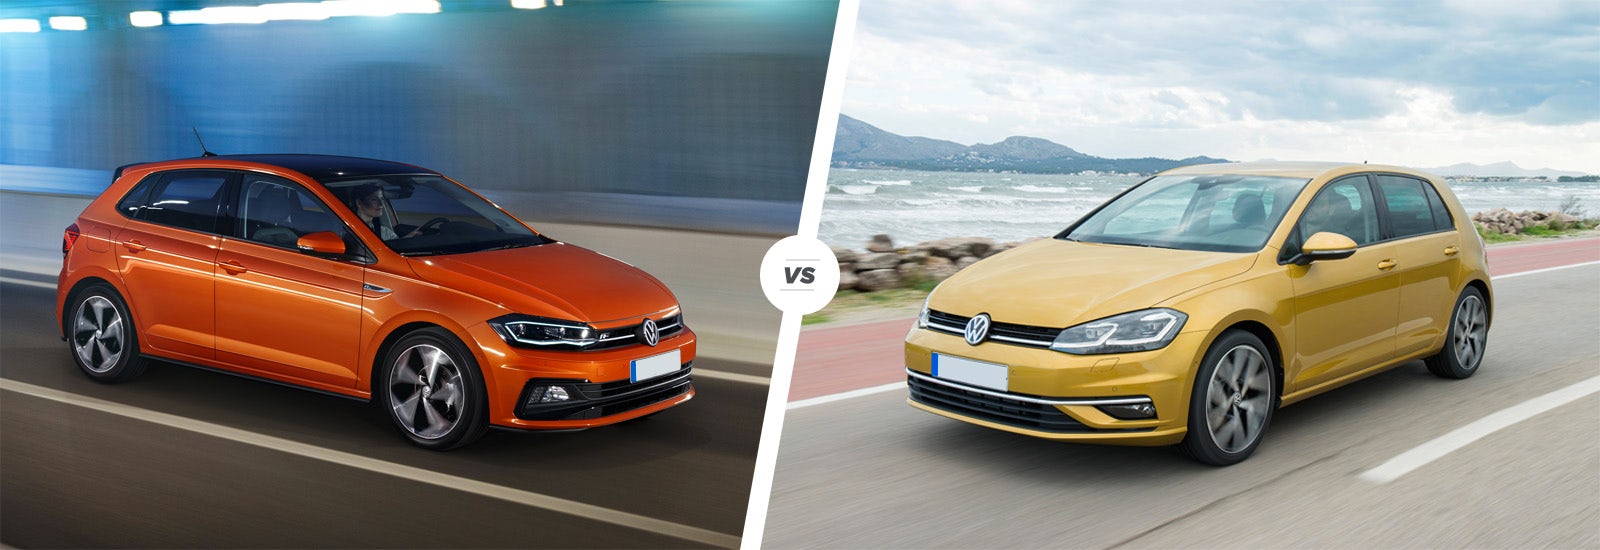 VW Polo vs Golf: which hatchback is best? | carwow